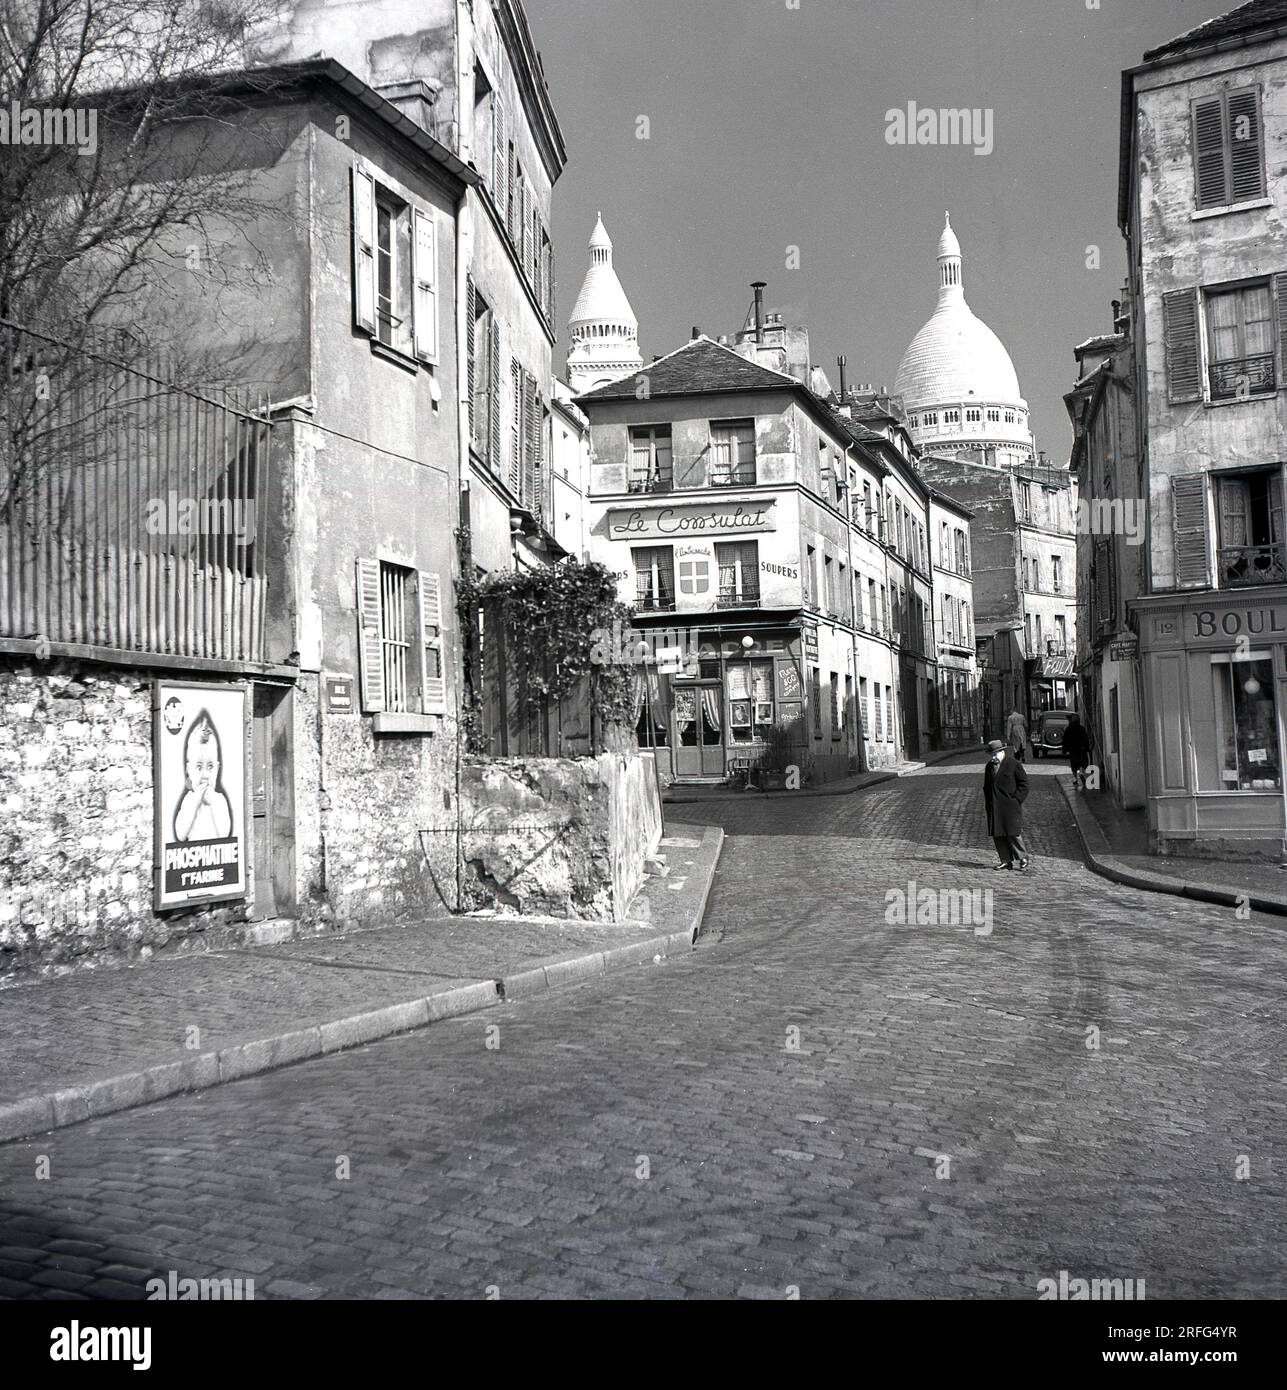 1950s, Paris, France, a man walking acorss a cobbled street in the Montmartre area of the Parisian city, famous for its street artists and church, Sacre Coeur. Picture shows Les Rue des Sales and the restaurant, 'Le Consulat' with the domes of the Sacre Coeur in the background. Stock Photo